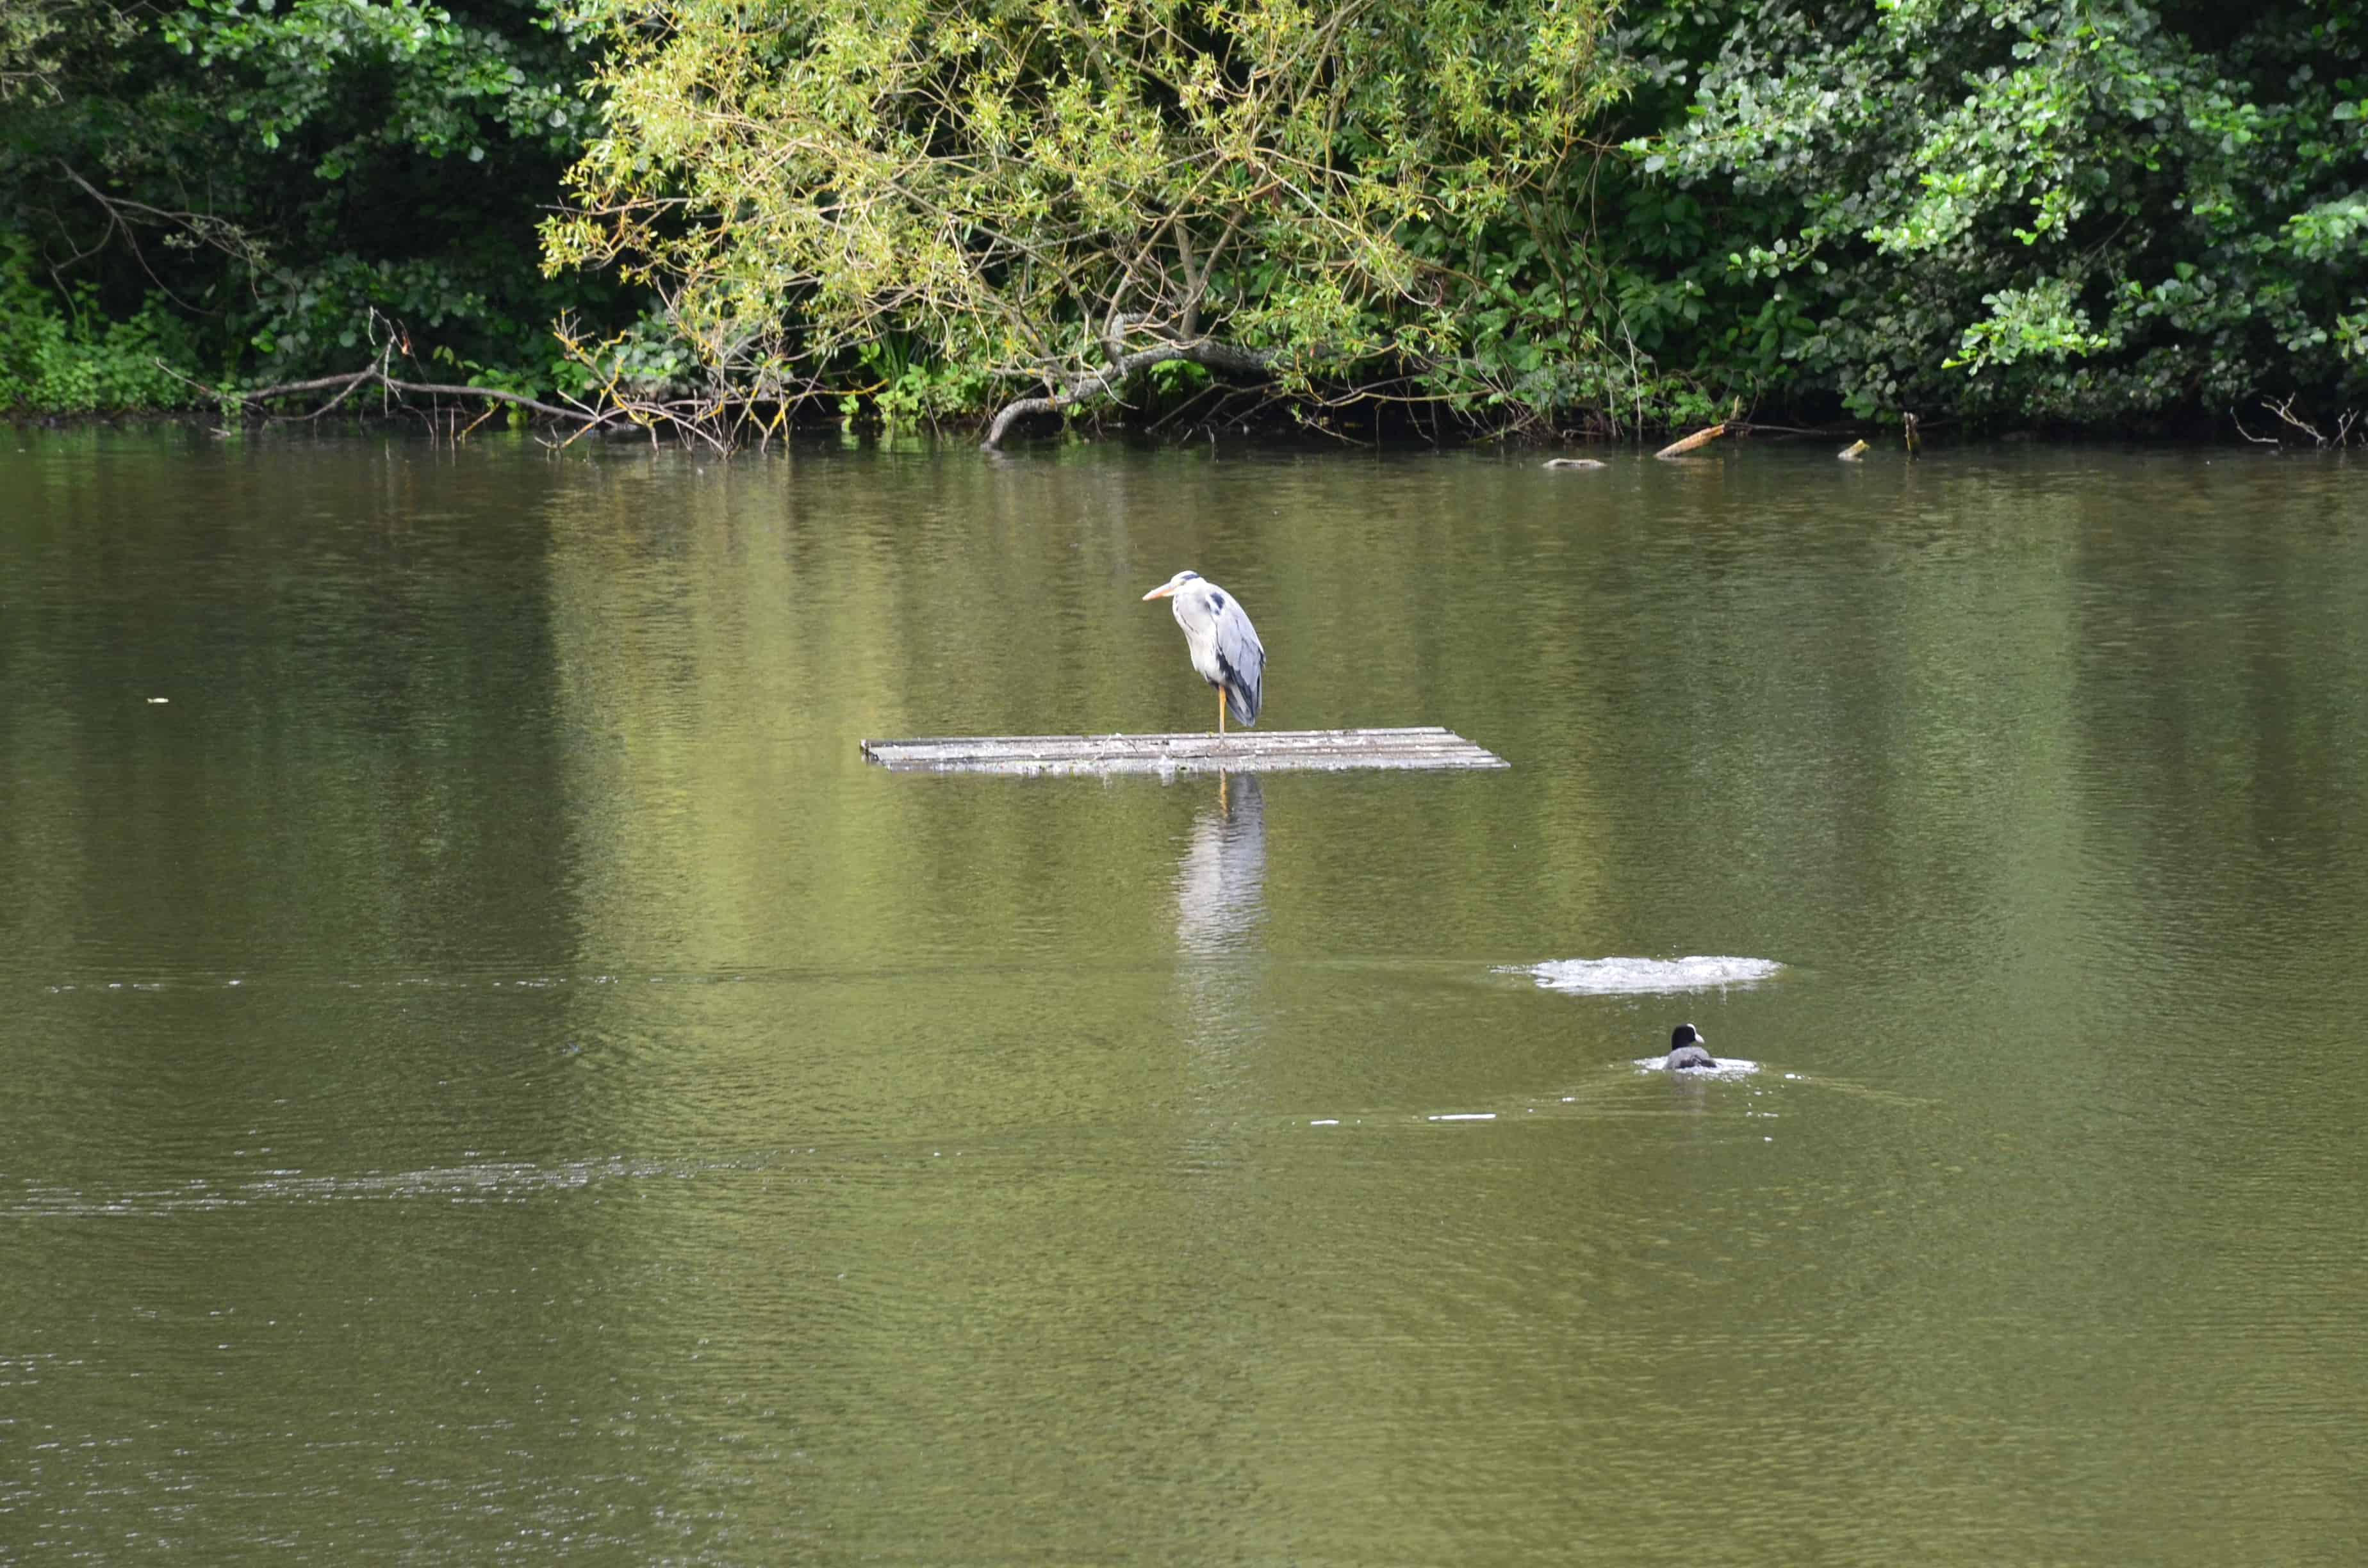 A heron at one of the ponds